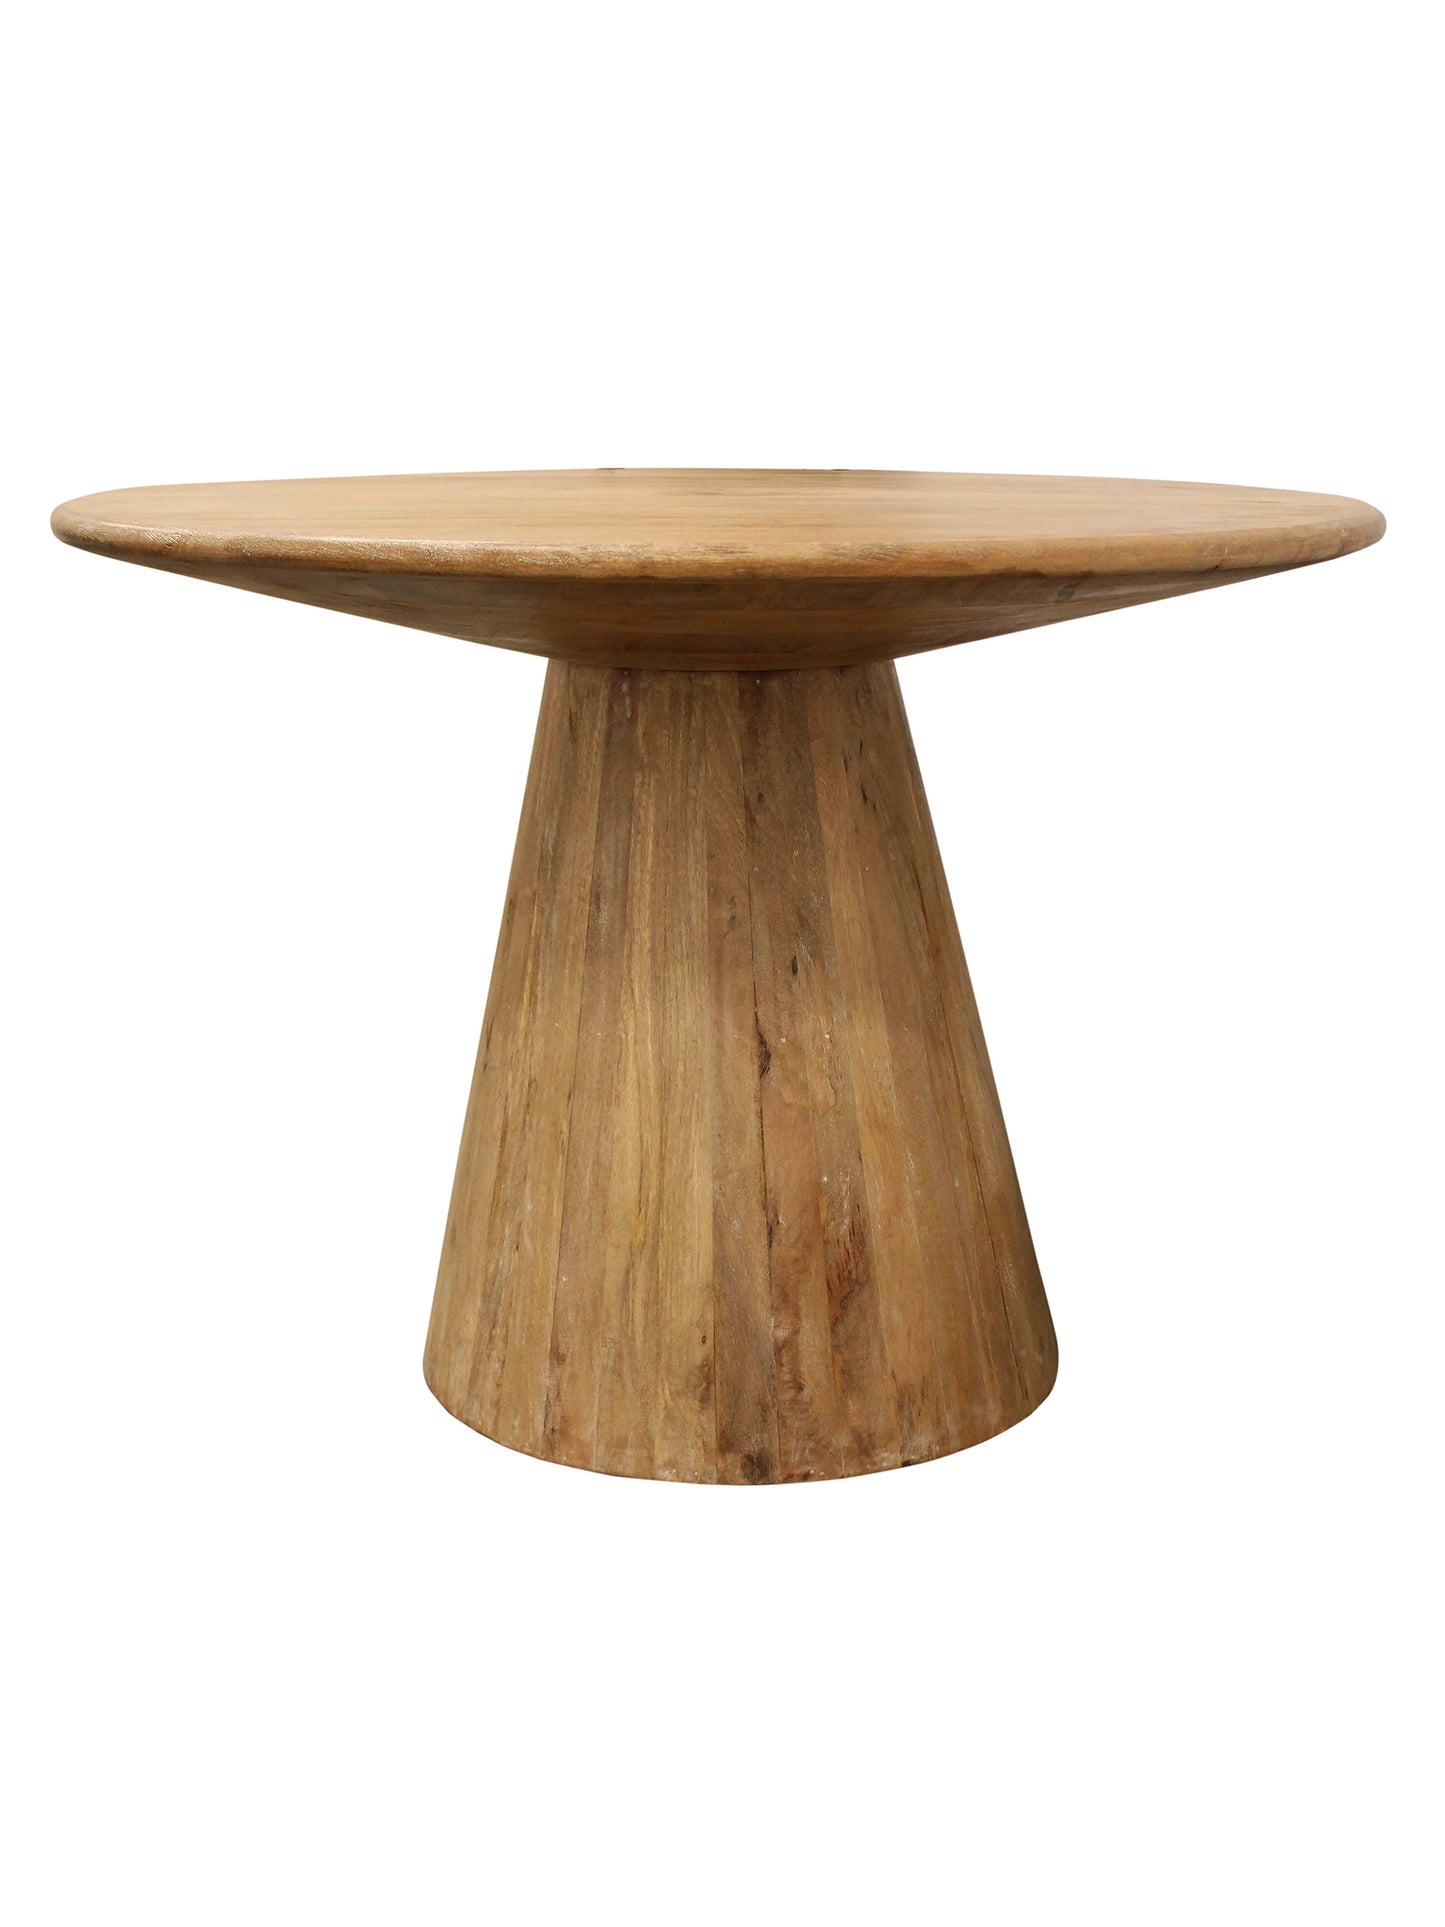 Eclectic Home Dining Table Jade 42 Wood Round